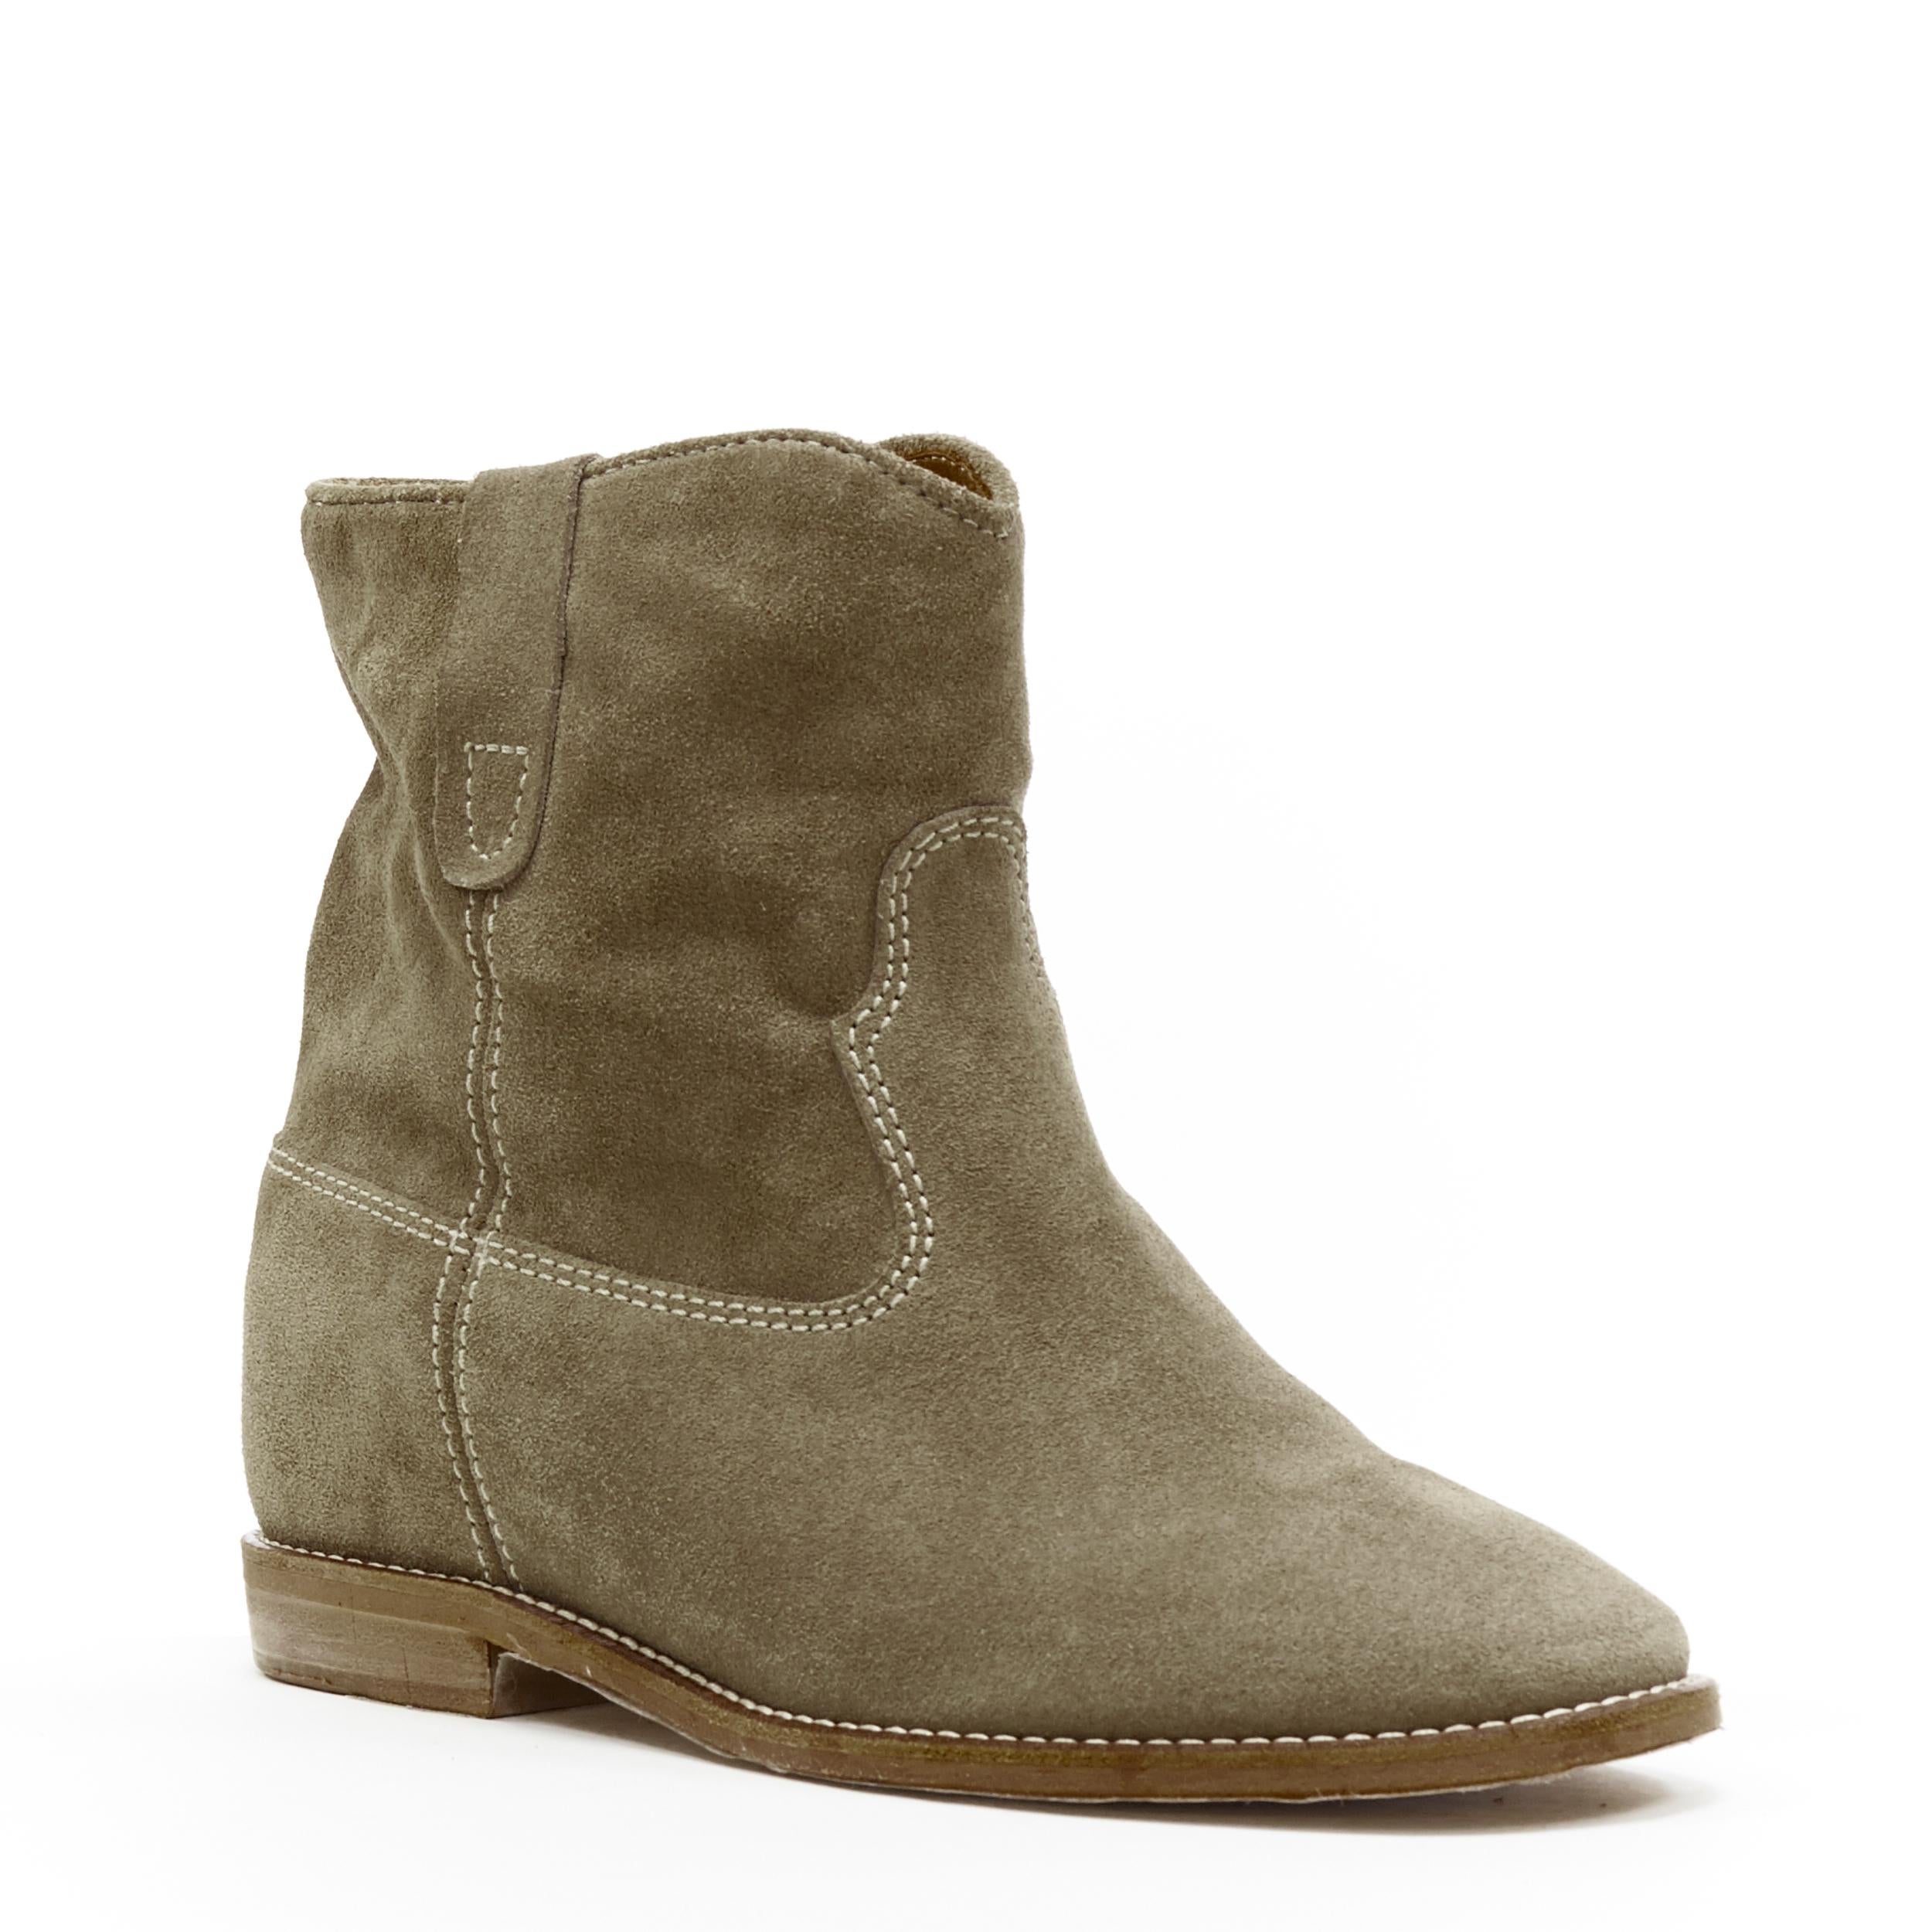 new ISABEL MARANT Signature Crisi Taupe suede concealed wedge ankle boots EU40
Brand: Isabel Marant
Designer: Isabel Marant
Model Name / Style: Crisi
Material: Suede
Color: Other; Taupe
Pattern: Solid
Closure: Pull on
Extra Detail: Part of Isabel